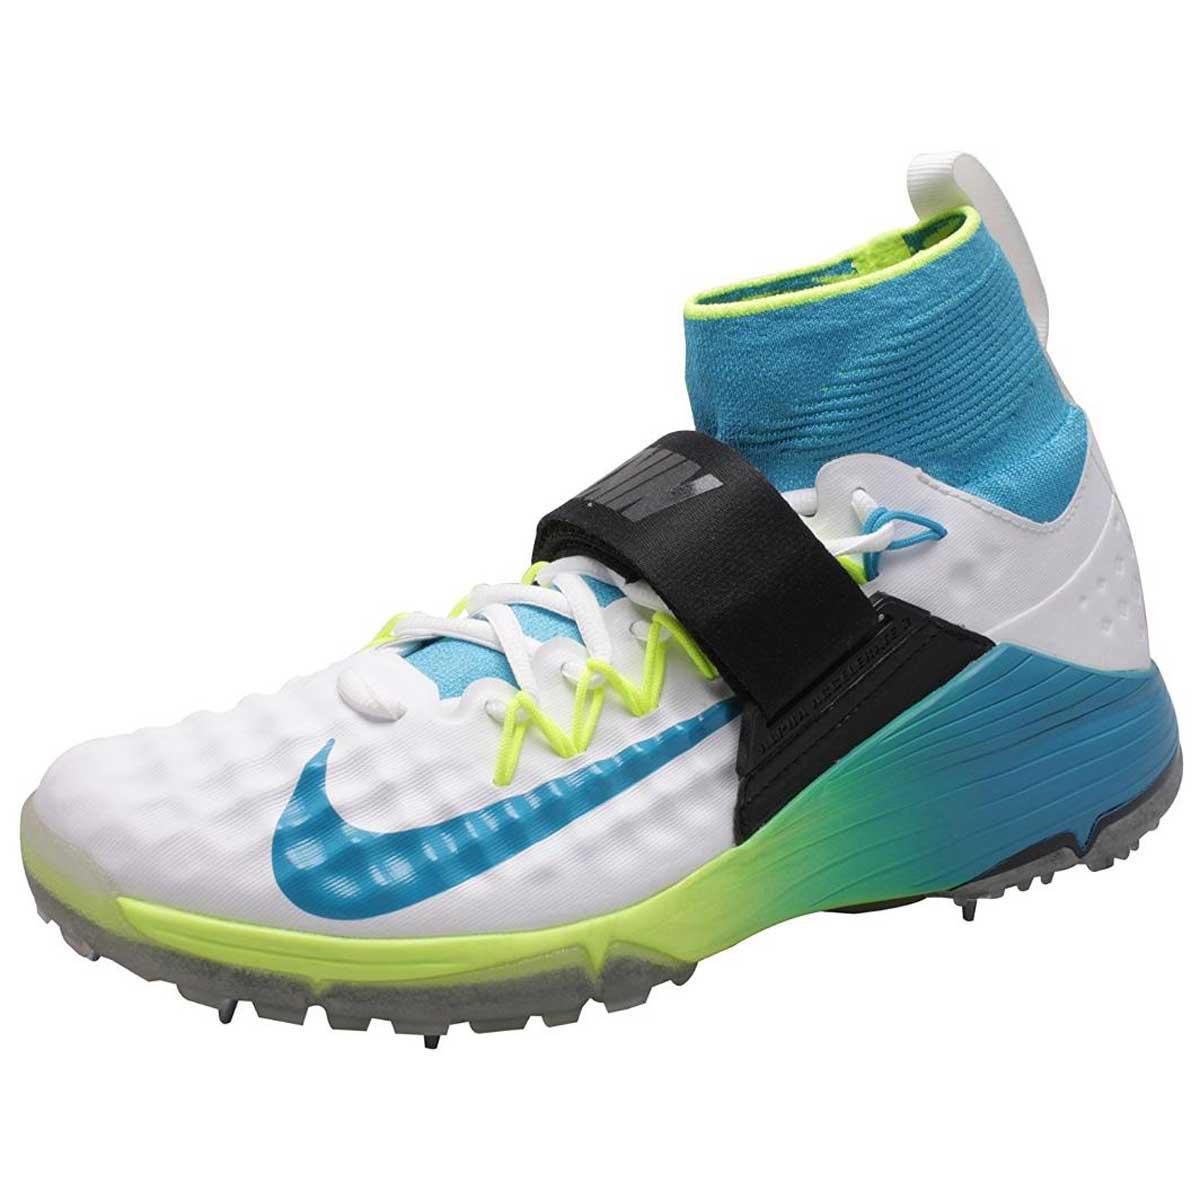 Buy Nike Alpha Accelerate 3 Cricket Shoes Online India